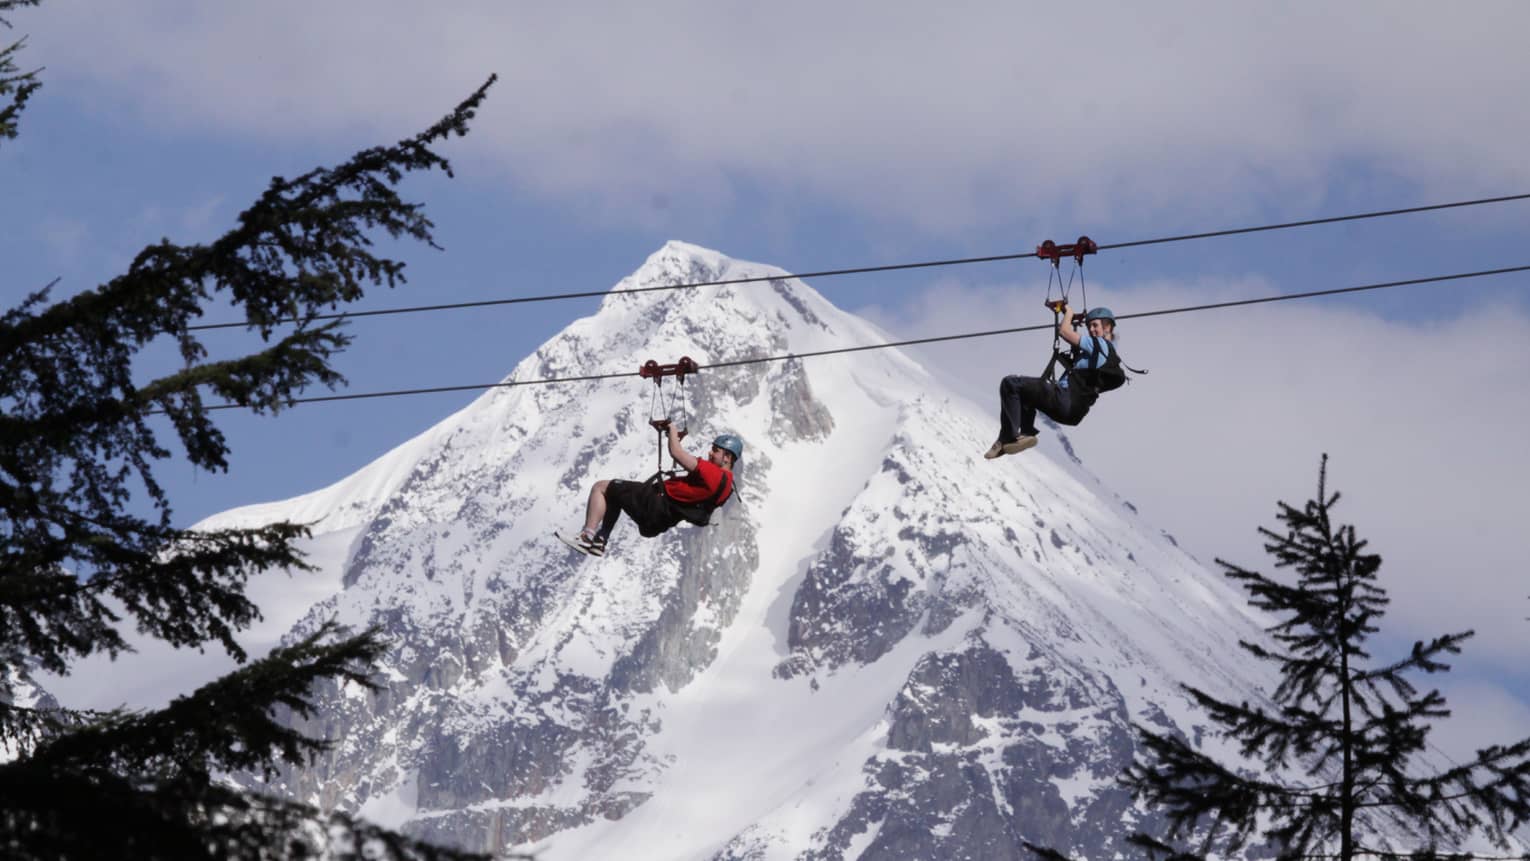 Two people zipline past pine trees with snowy mountain in background 